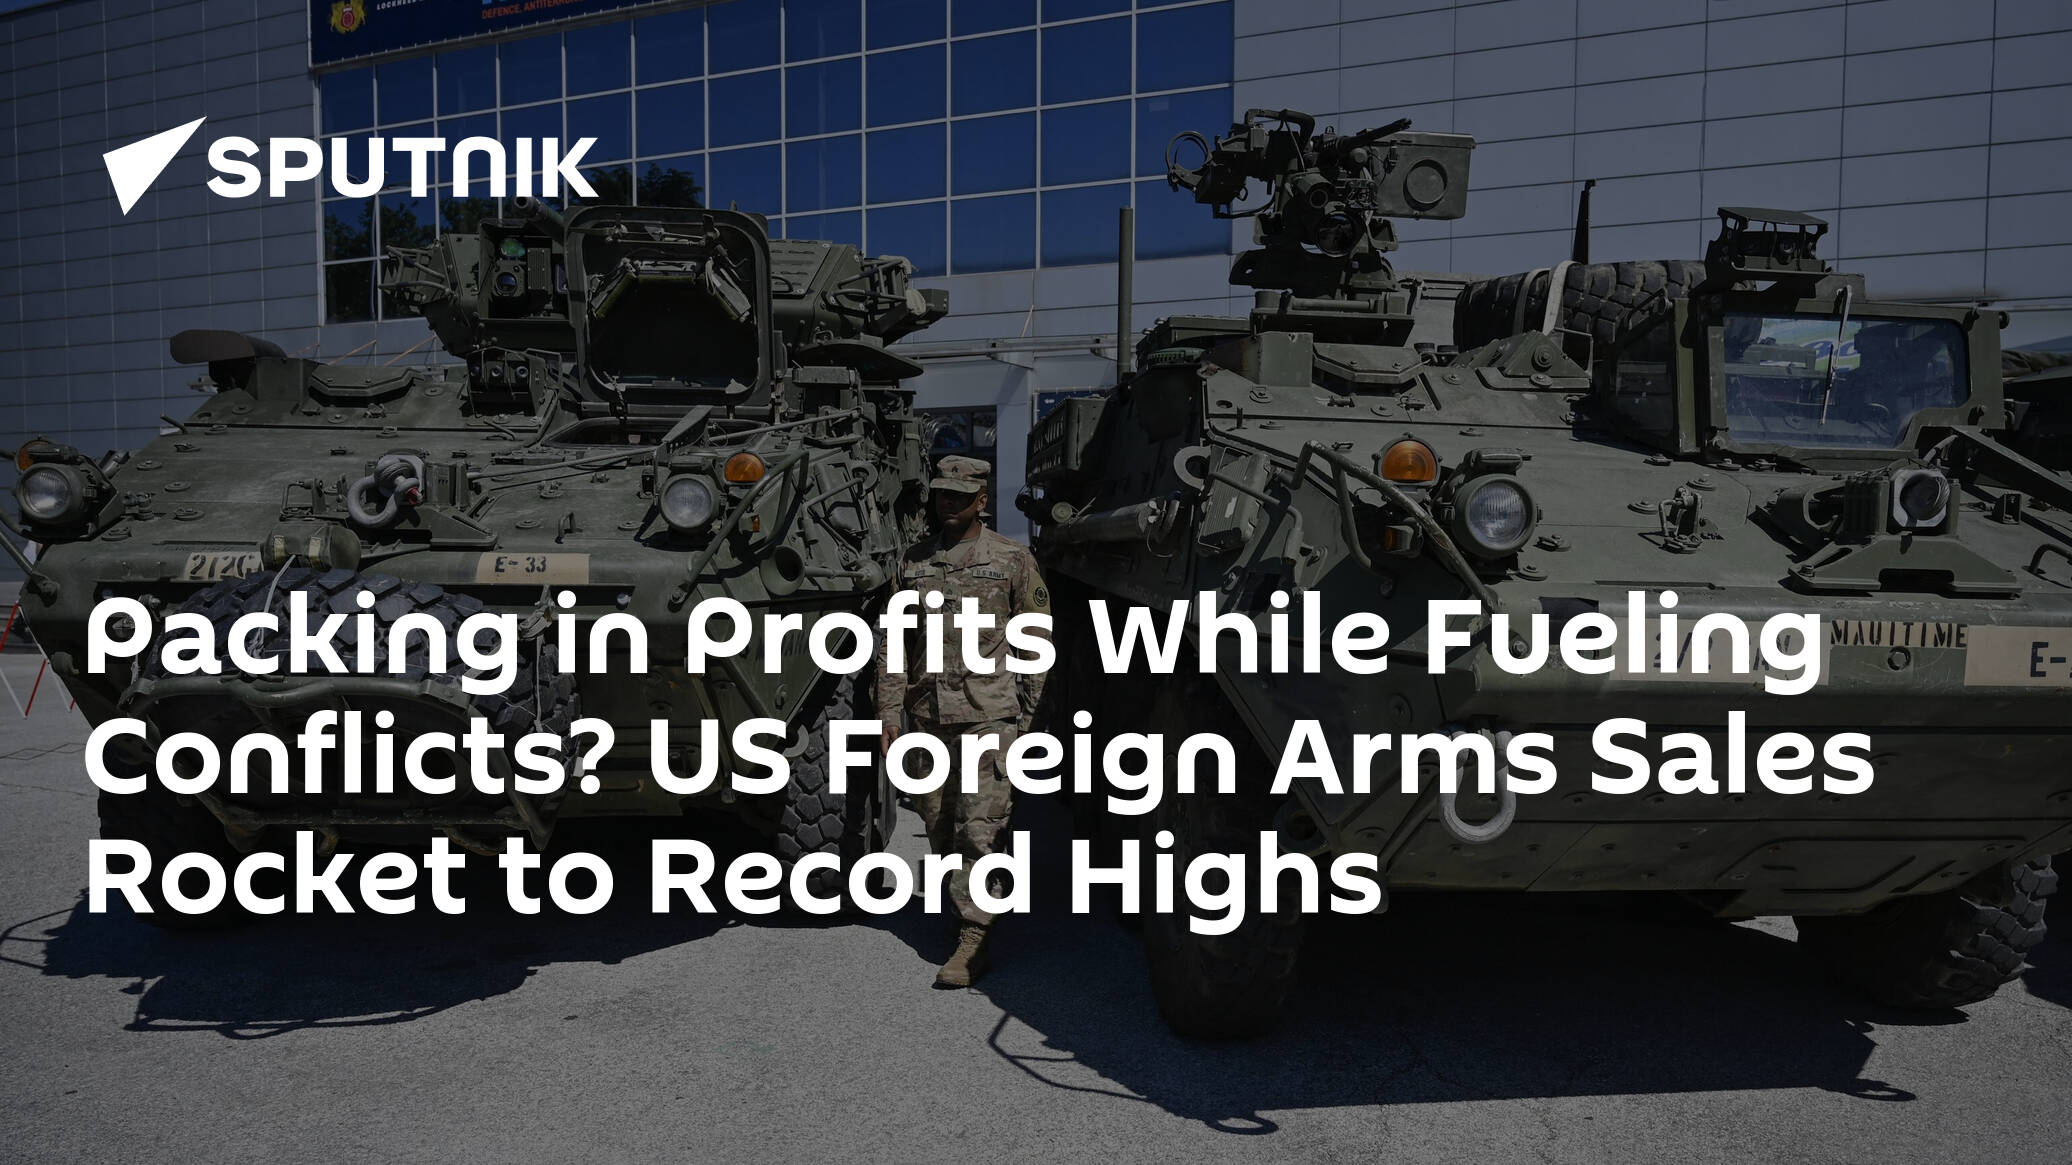 Packing in Profits While Fueling Conflicts? US Foreign Arms Sales Rocket to Record Highs